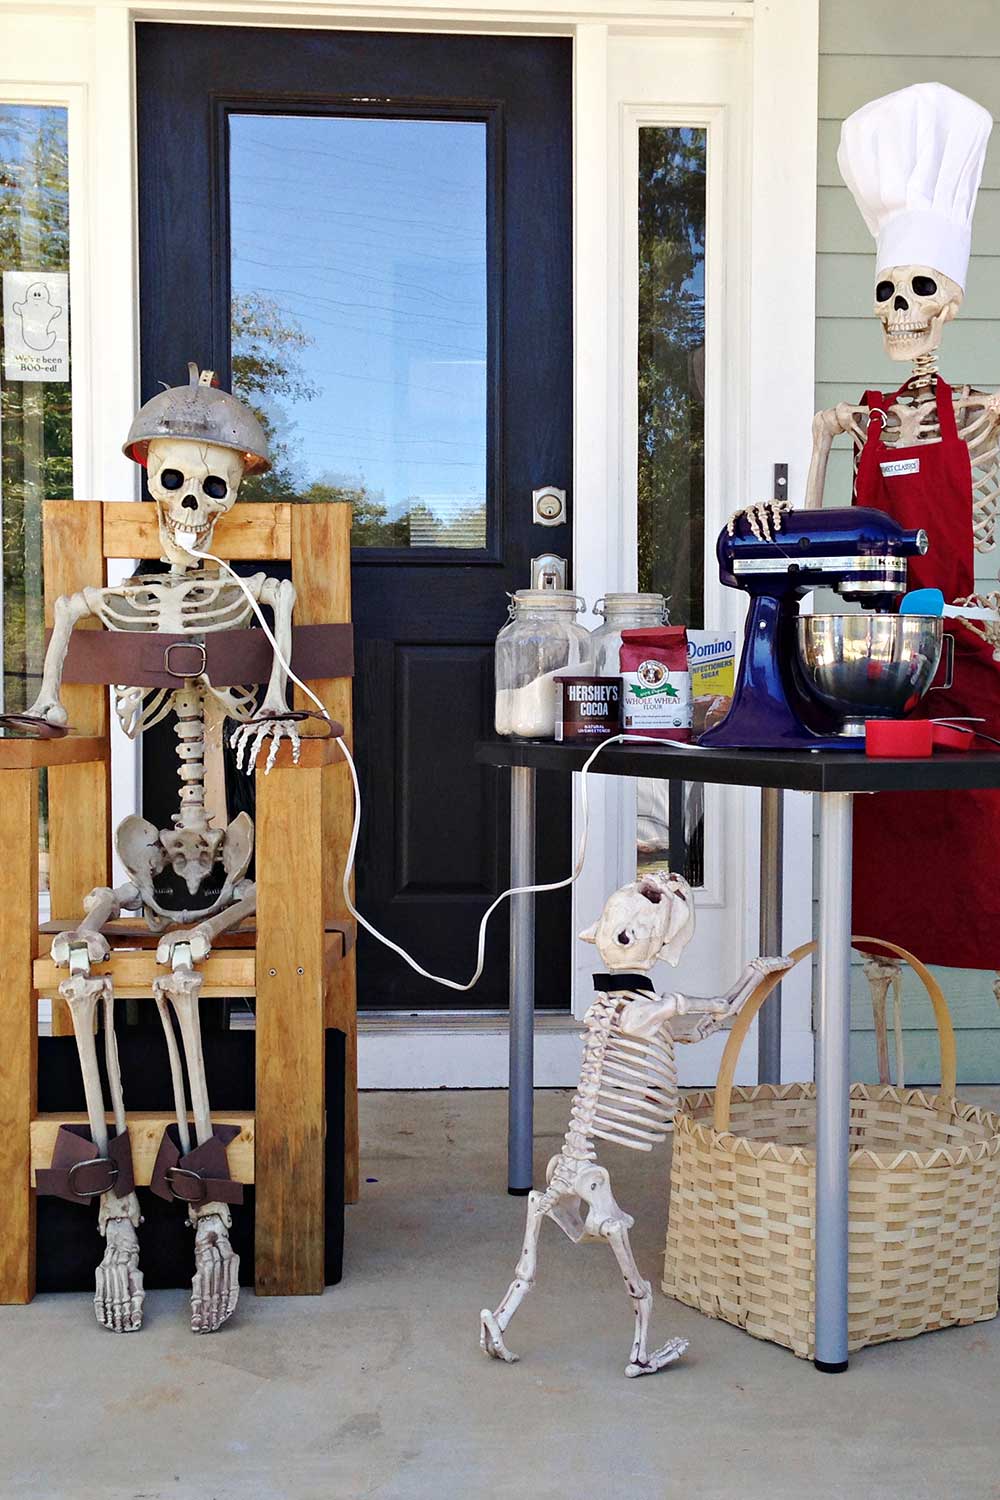 Park Hills Residents Have Fun Posing Skeletons In Their Yard Every Day